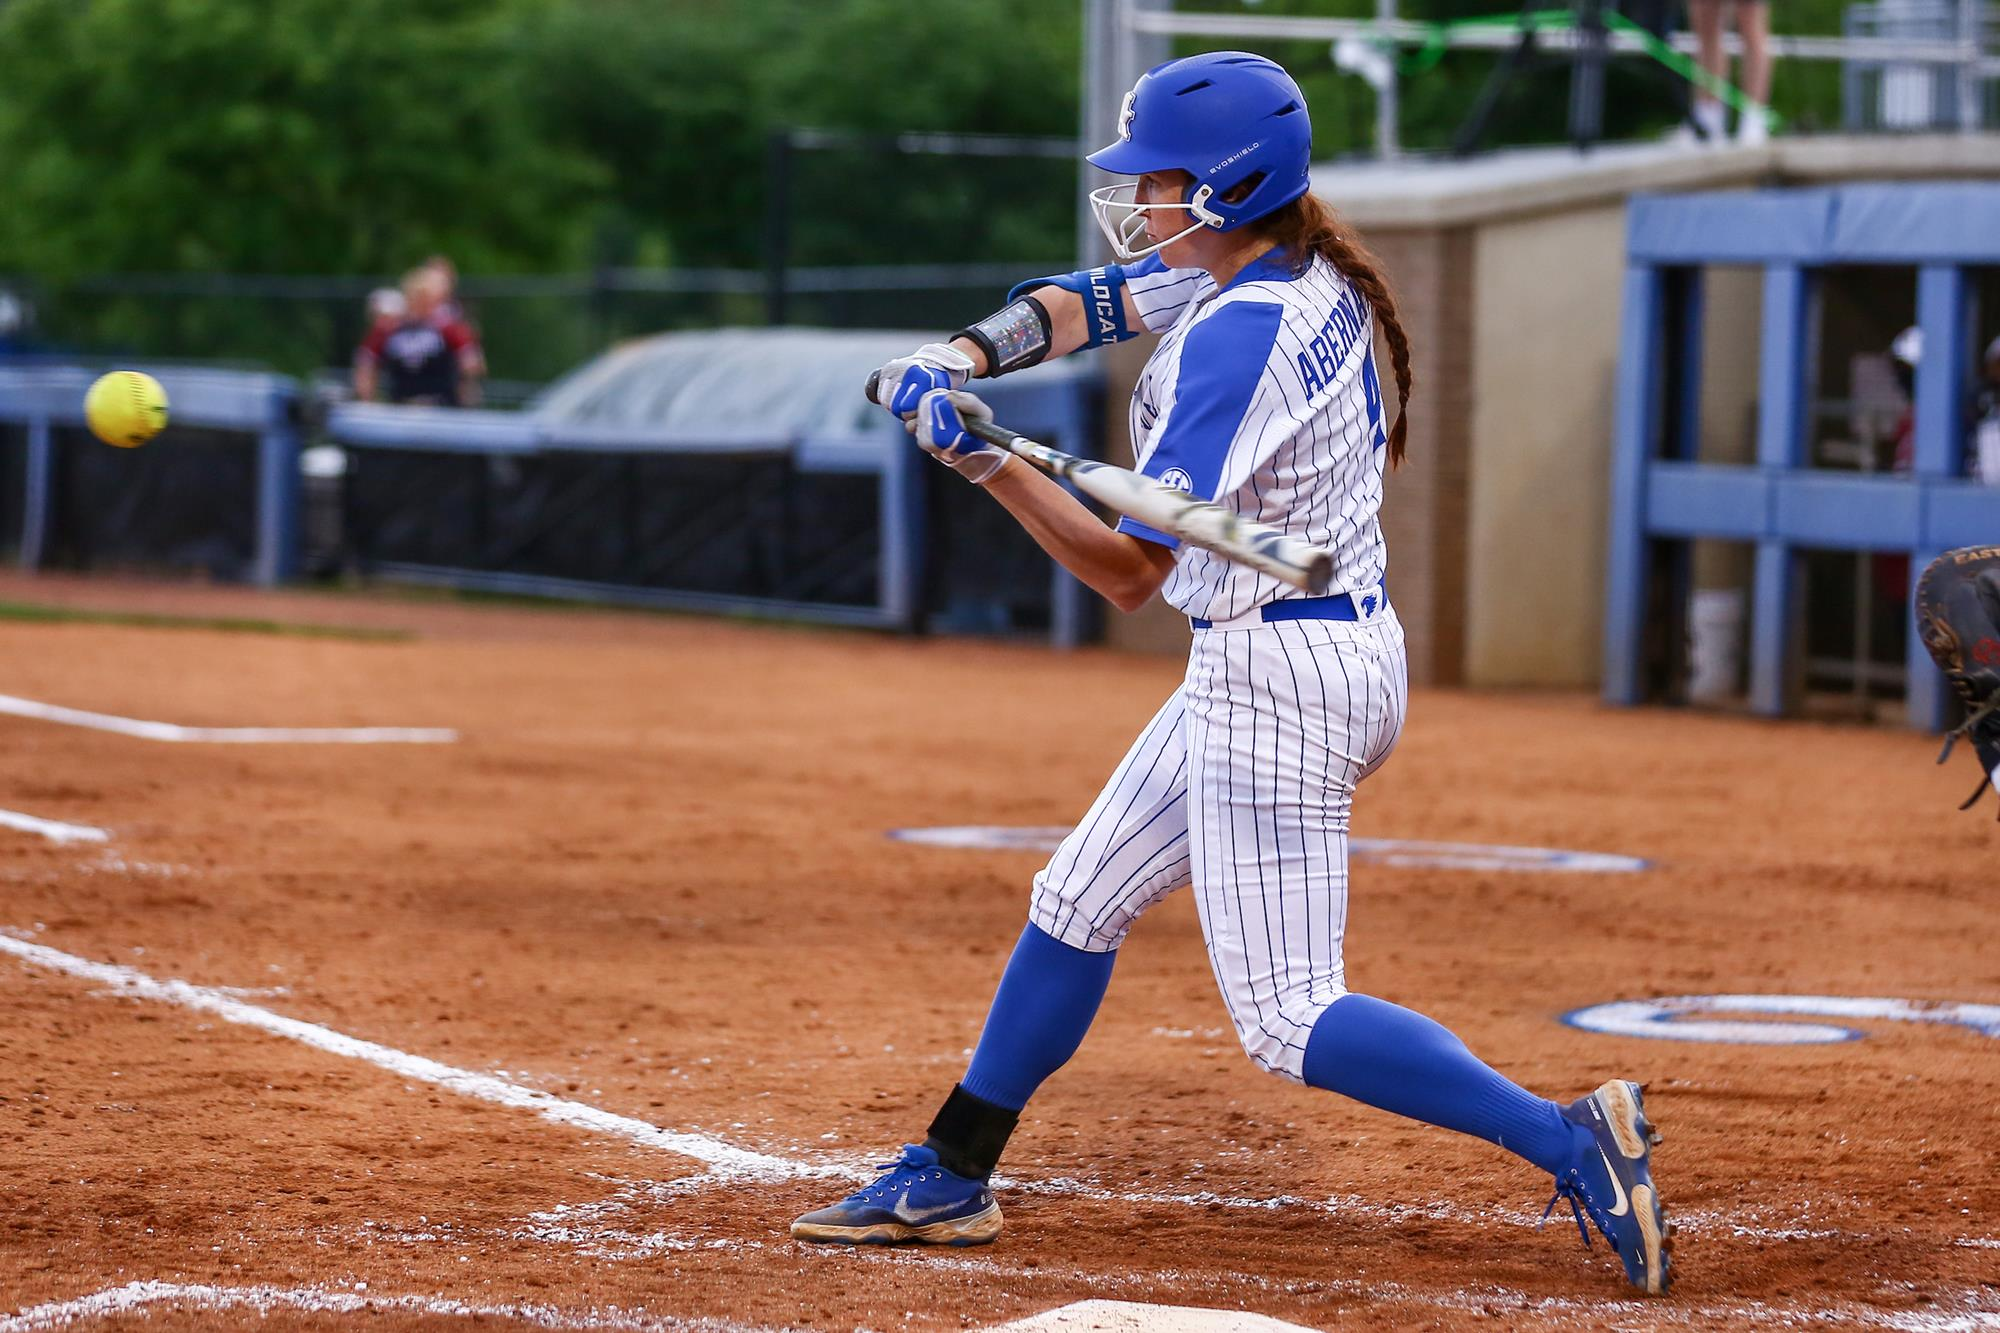 Kowalik, Coffel, Humes and Abernathy Voted NFCA All-Region